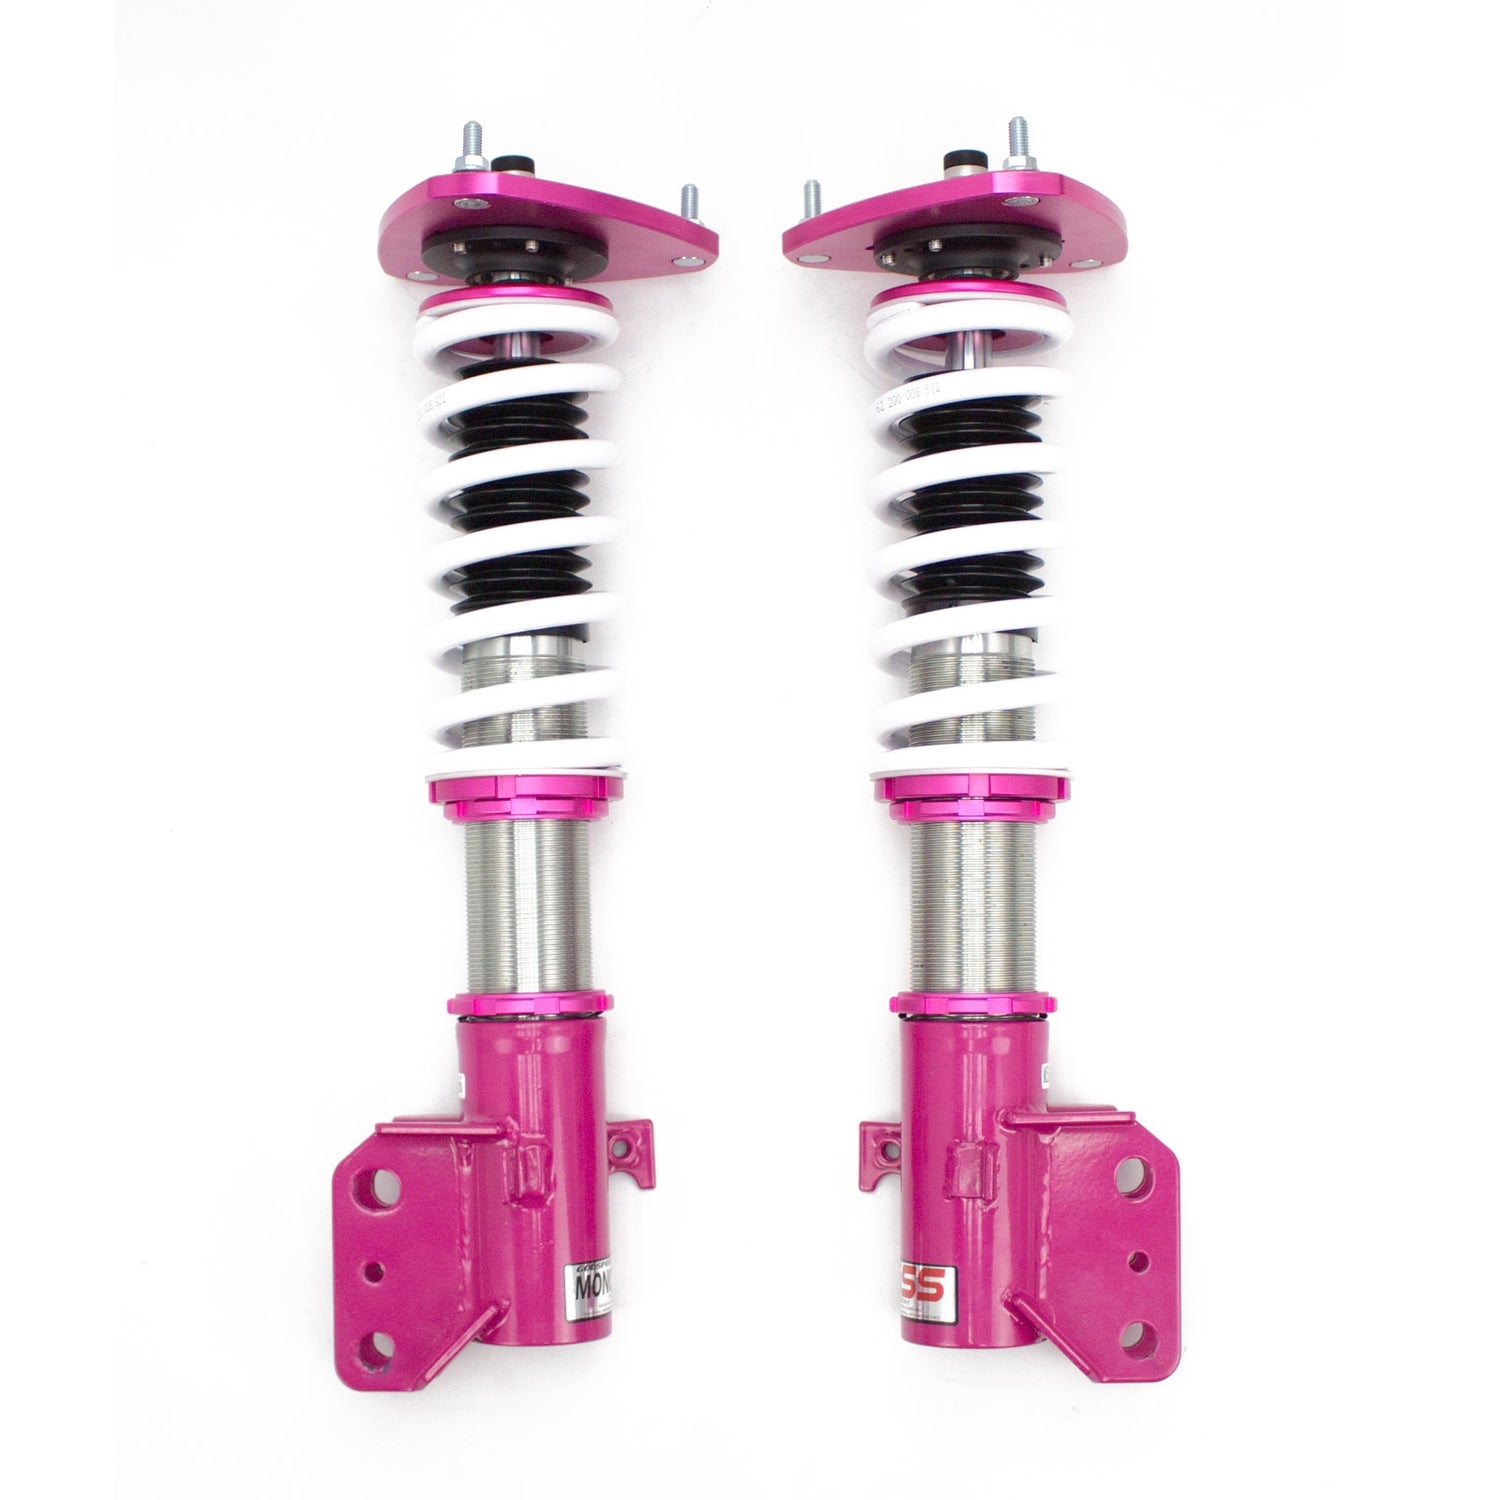 Godspeed MSS0156 MonoSS Coilover Lowering Kit, Fully Adjustable, Ride Height, Spring Tension And 16 Click Damping, Subaru Outback(BR) 2010-14